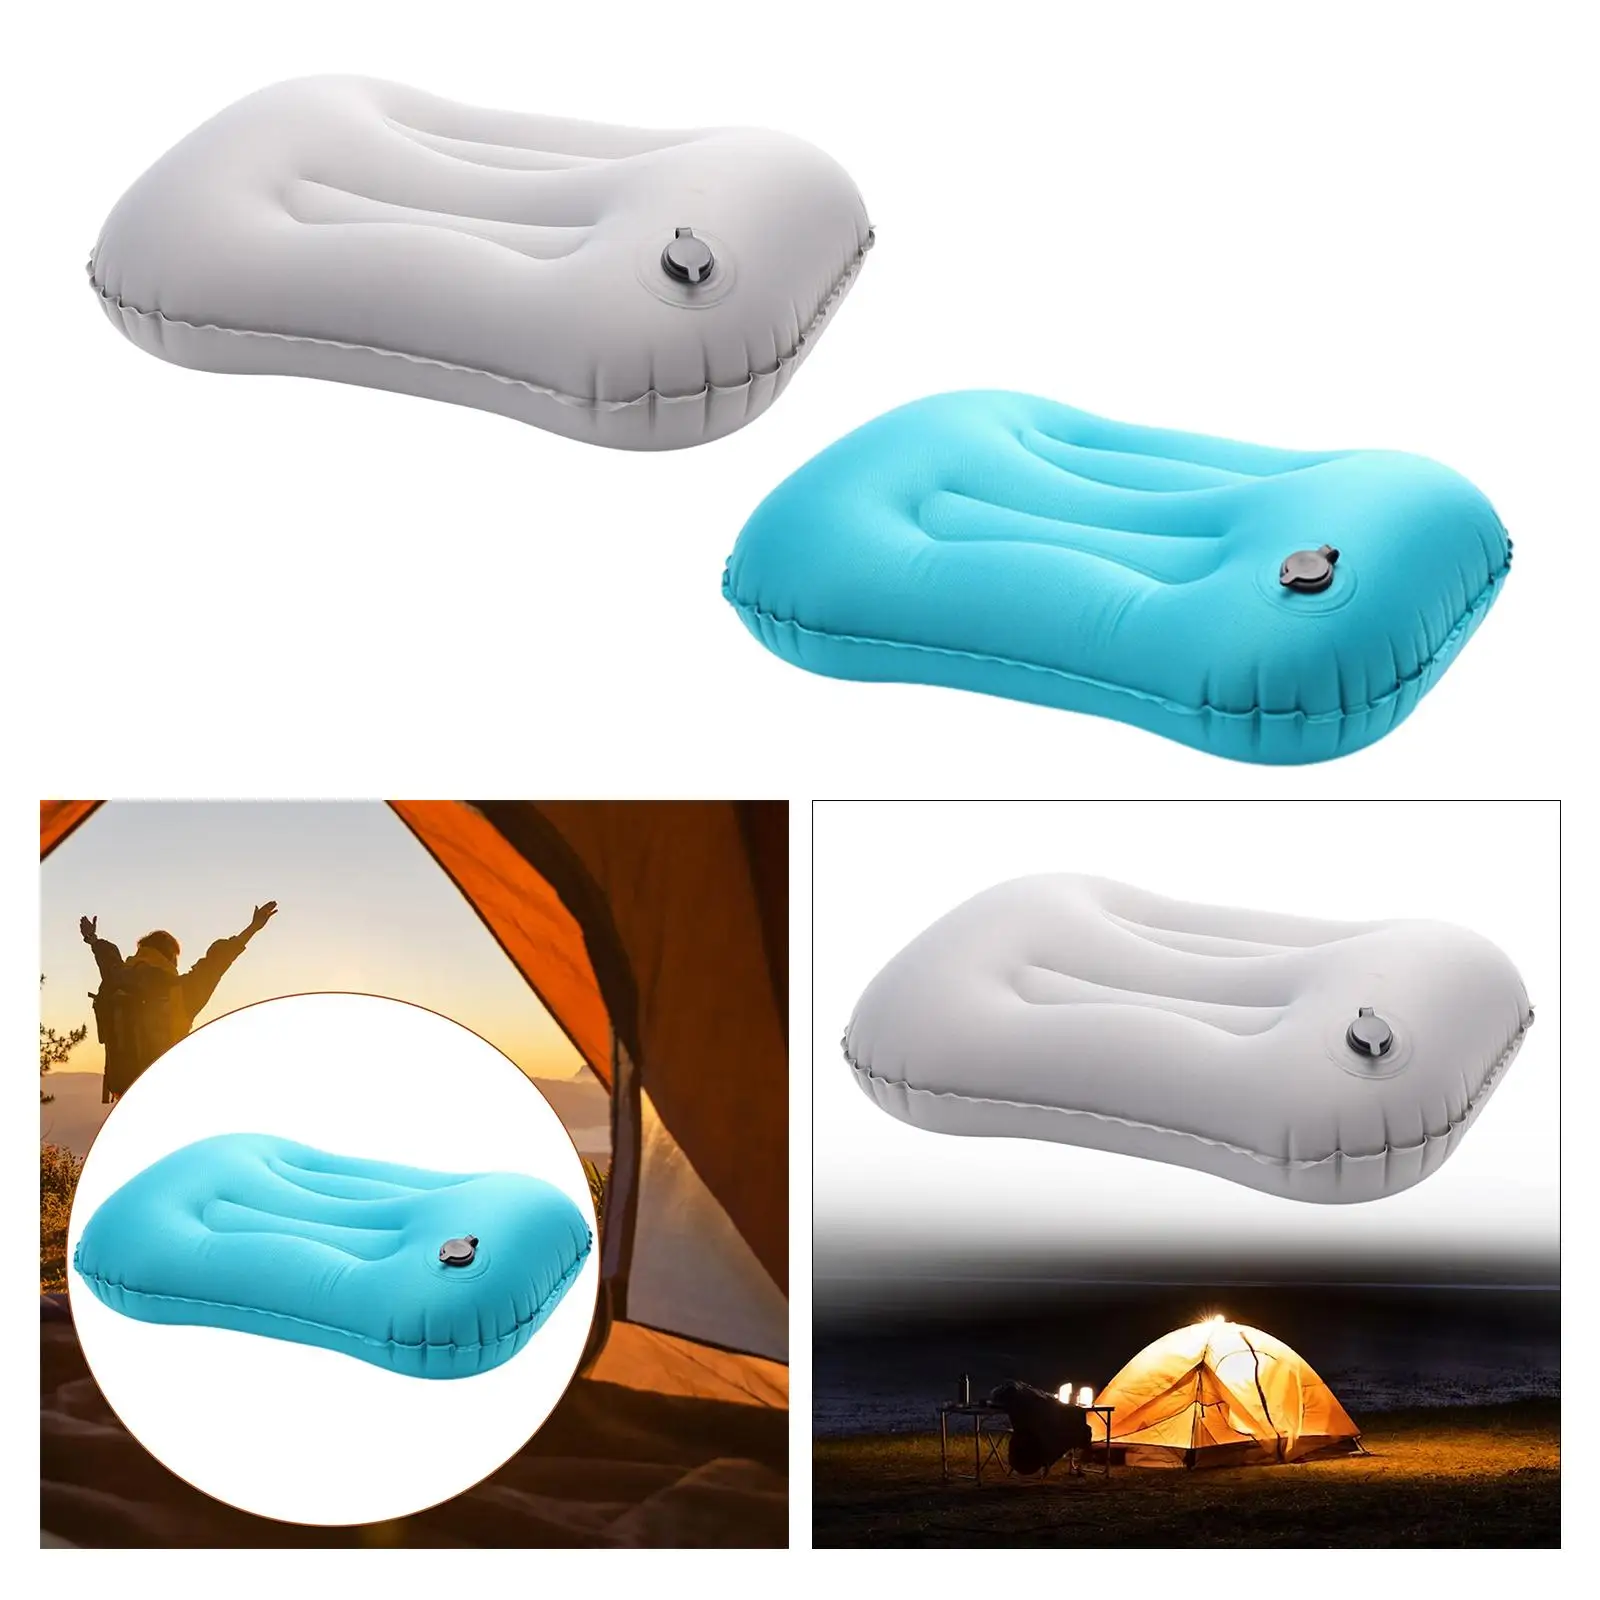 Camping Inflatable Pillow Lightweight for Neck Lumbar Support Travel Pillow for Backpacking Hiking Hammock Traveling Nap Rest